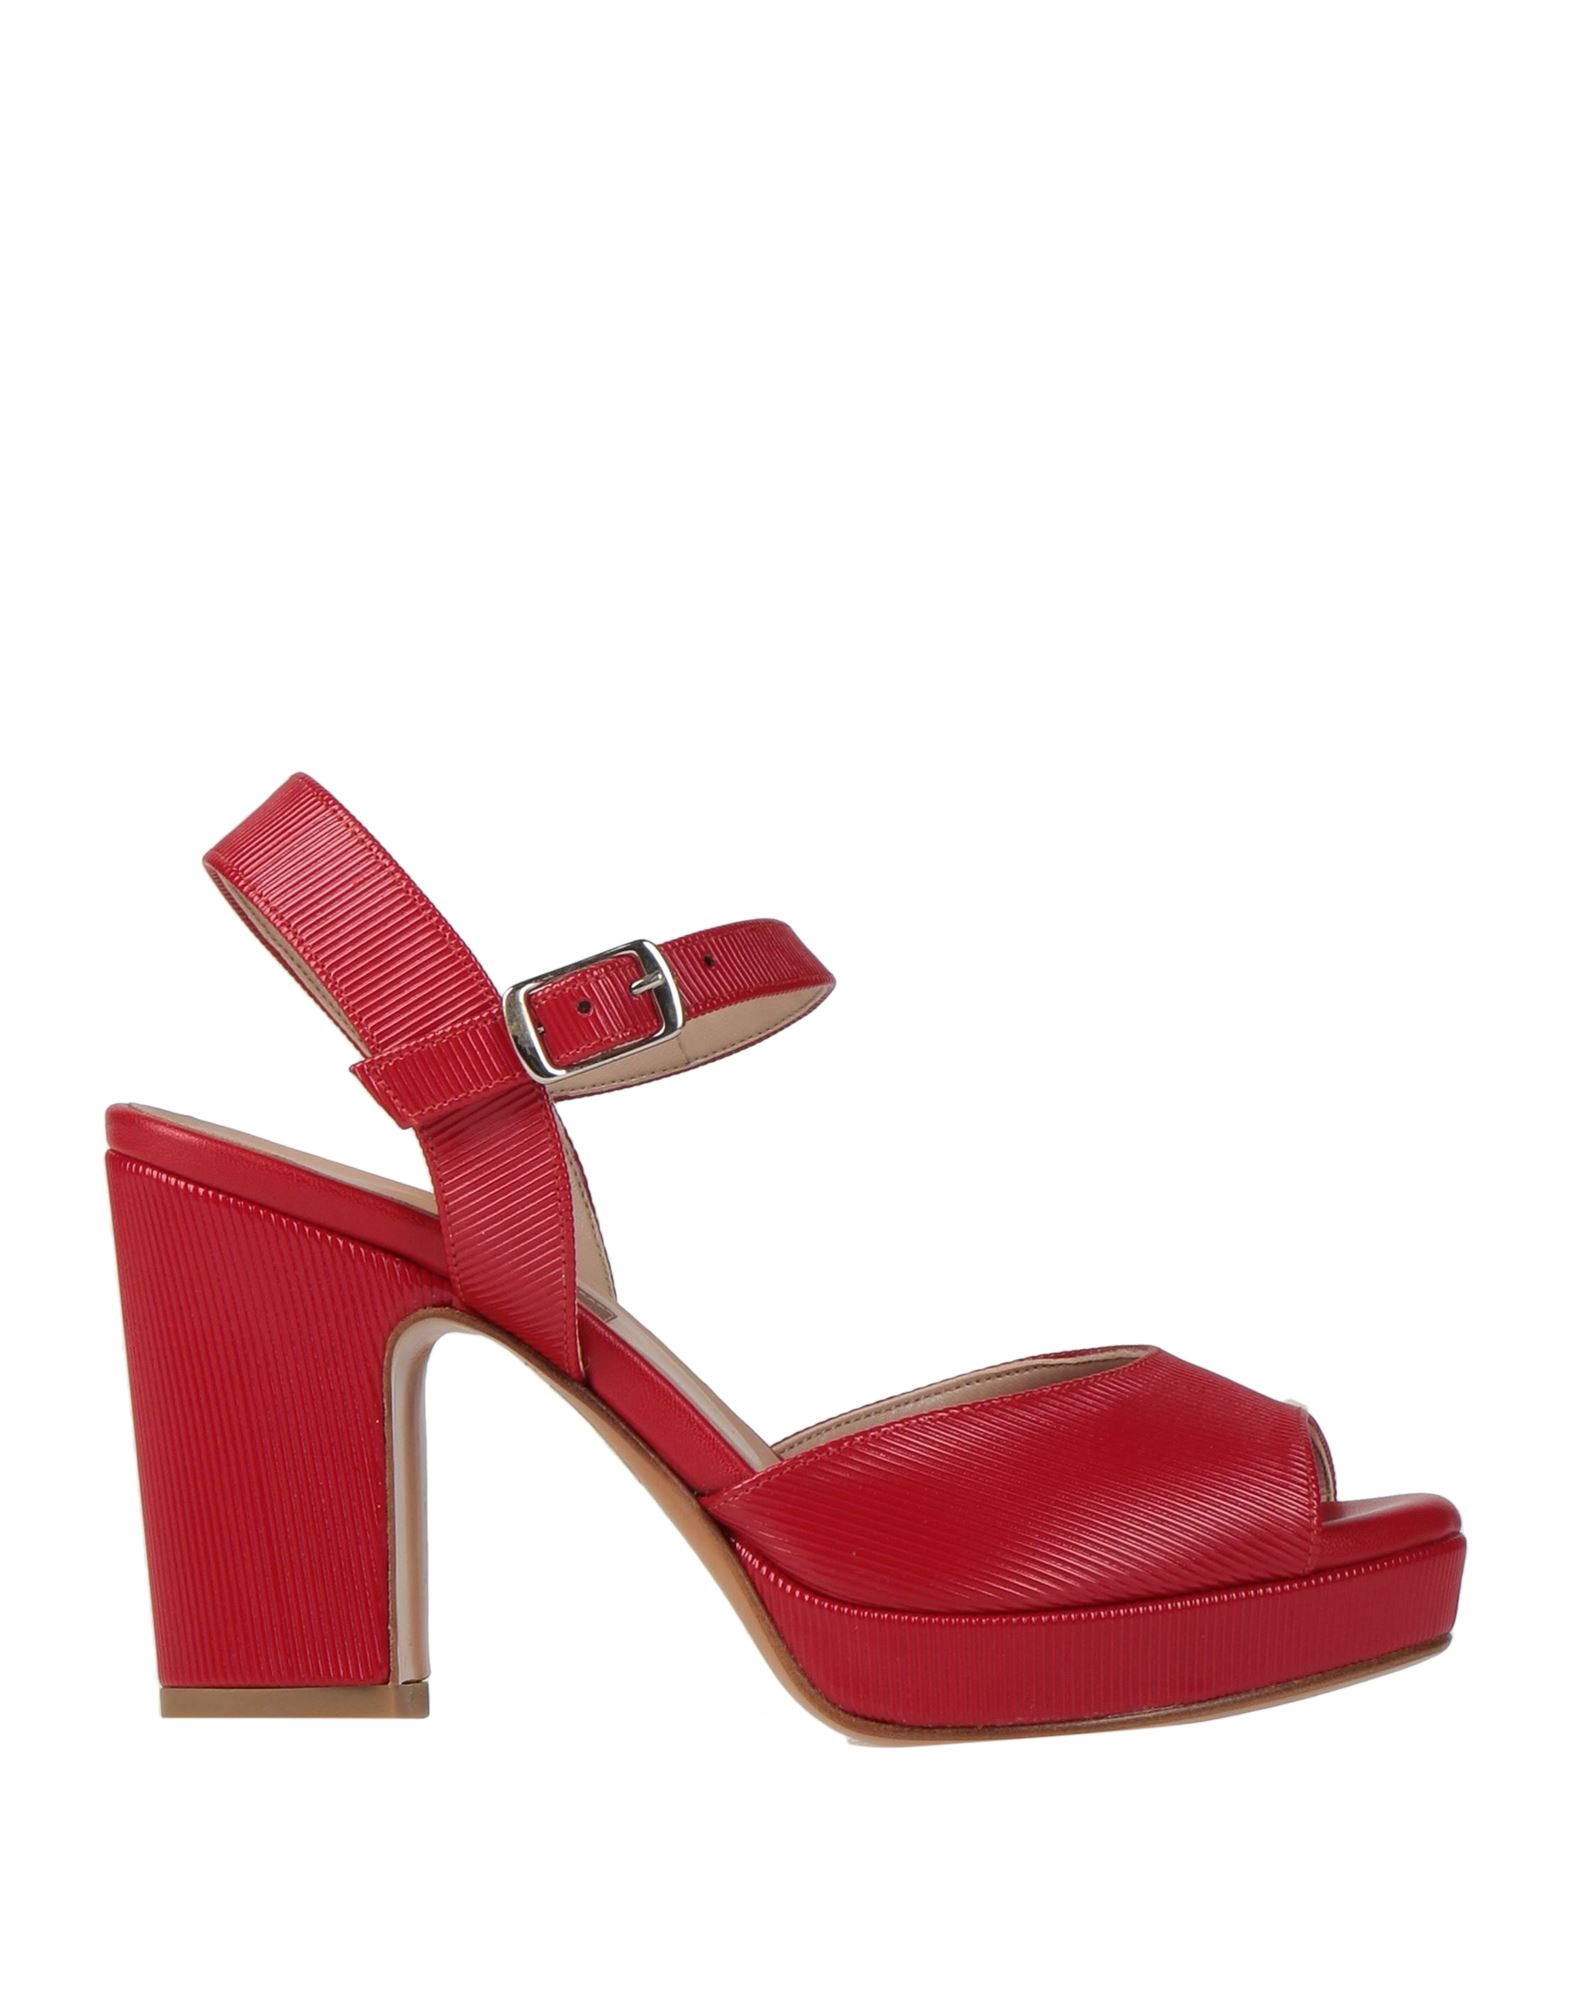 Albano Sandals In Red